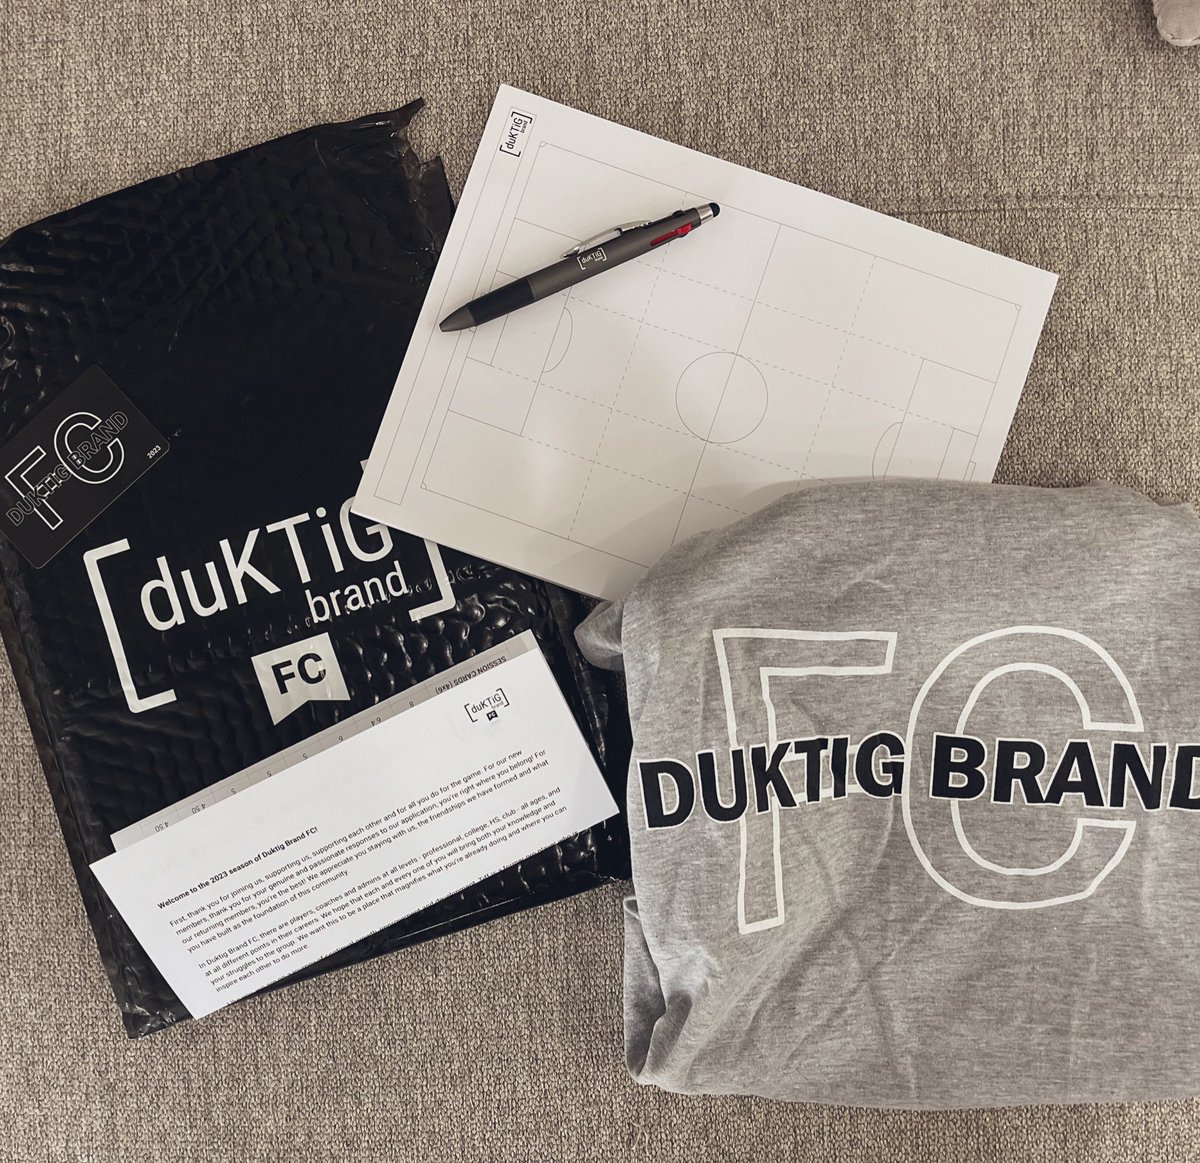 Thank you @duktigbrand ! Excited to be part of Duktig Brand FC. Use code Socha23 to get 10% off! #PlanToBeGreat